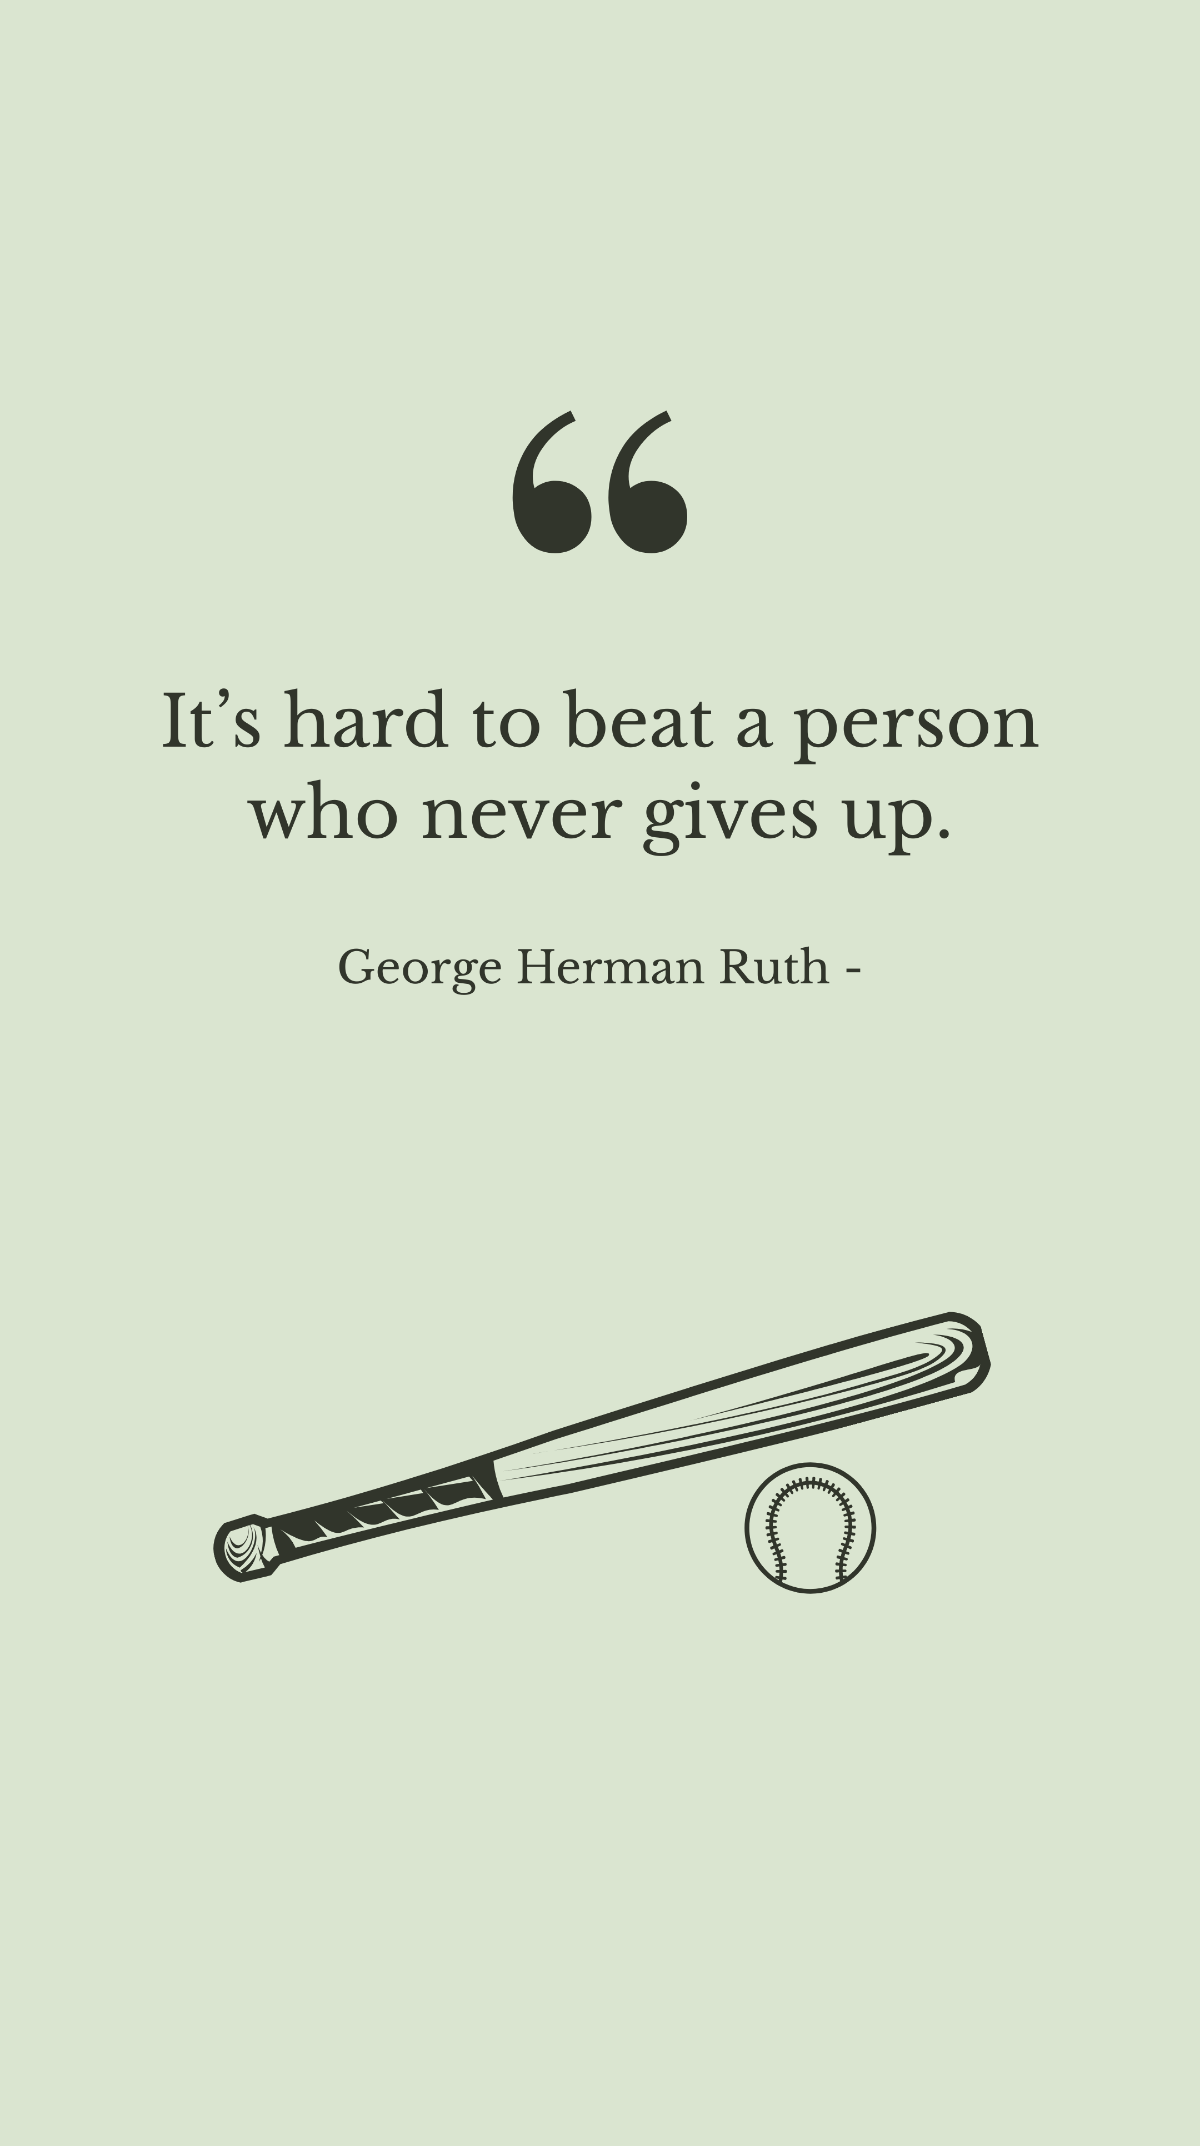 Free George Herman Ruth - It’s hard to beat a person who never gives up. Template